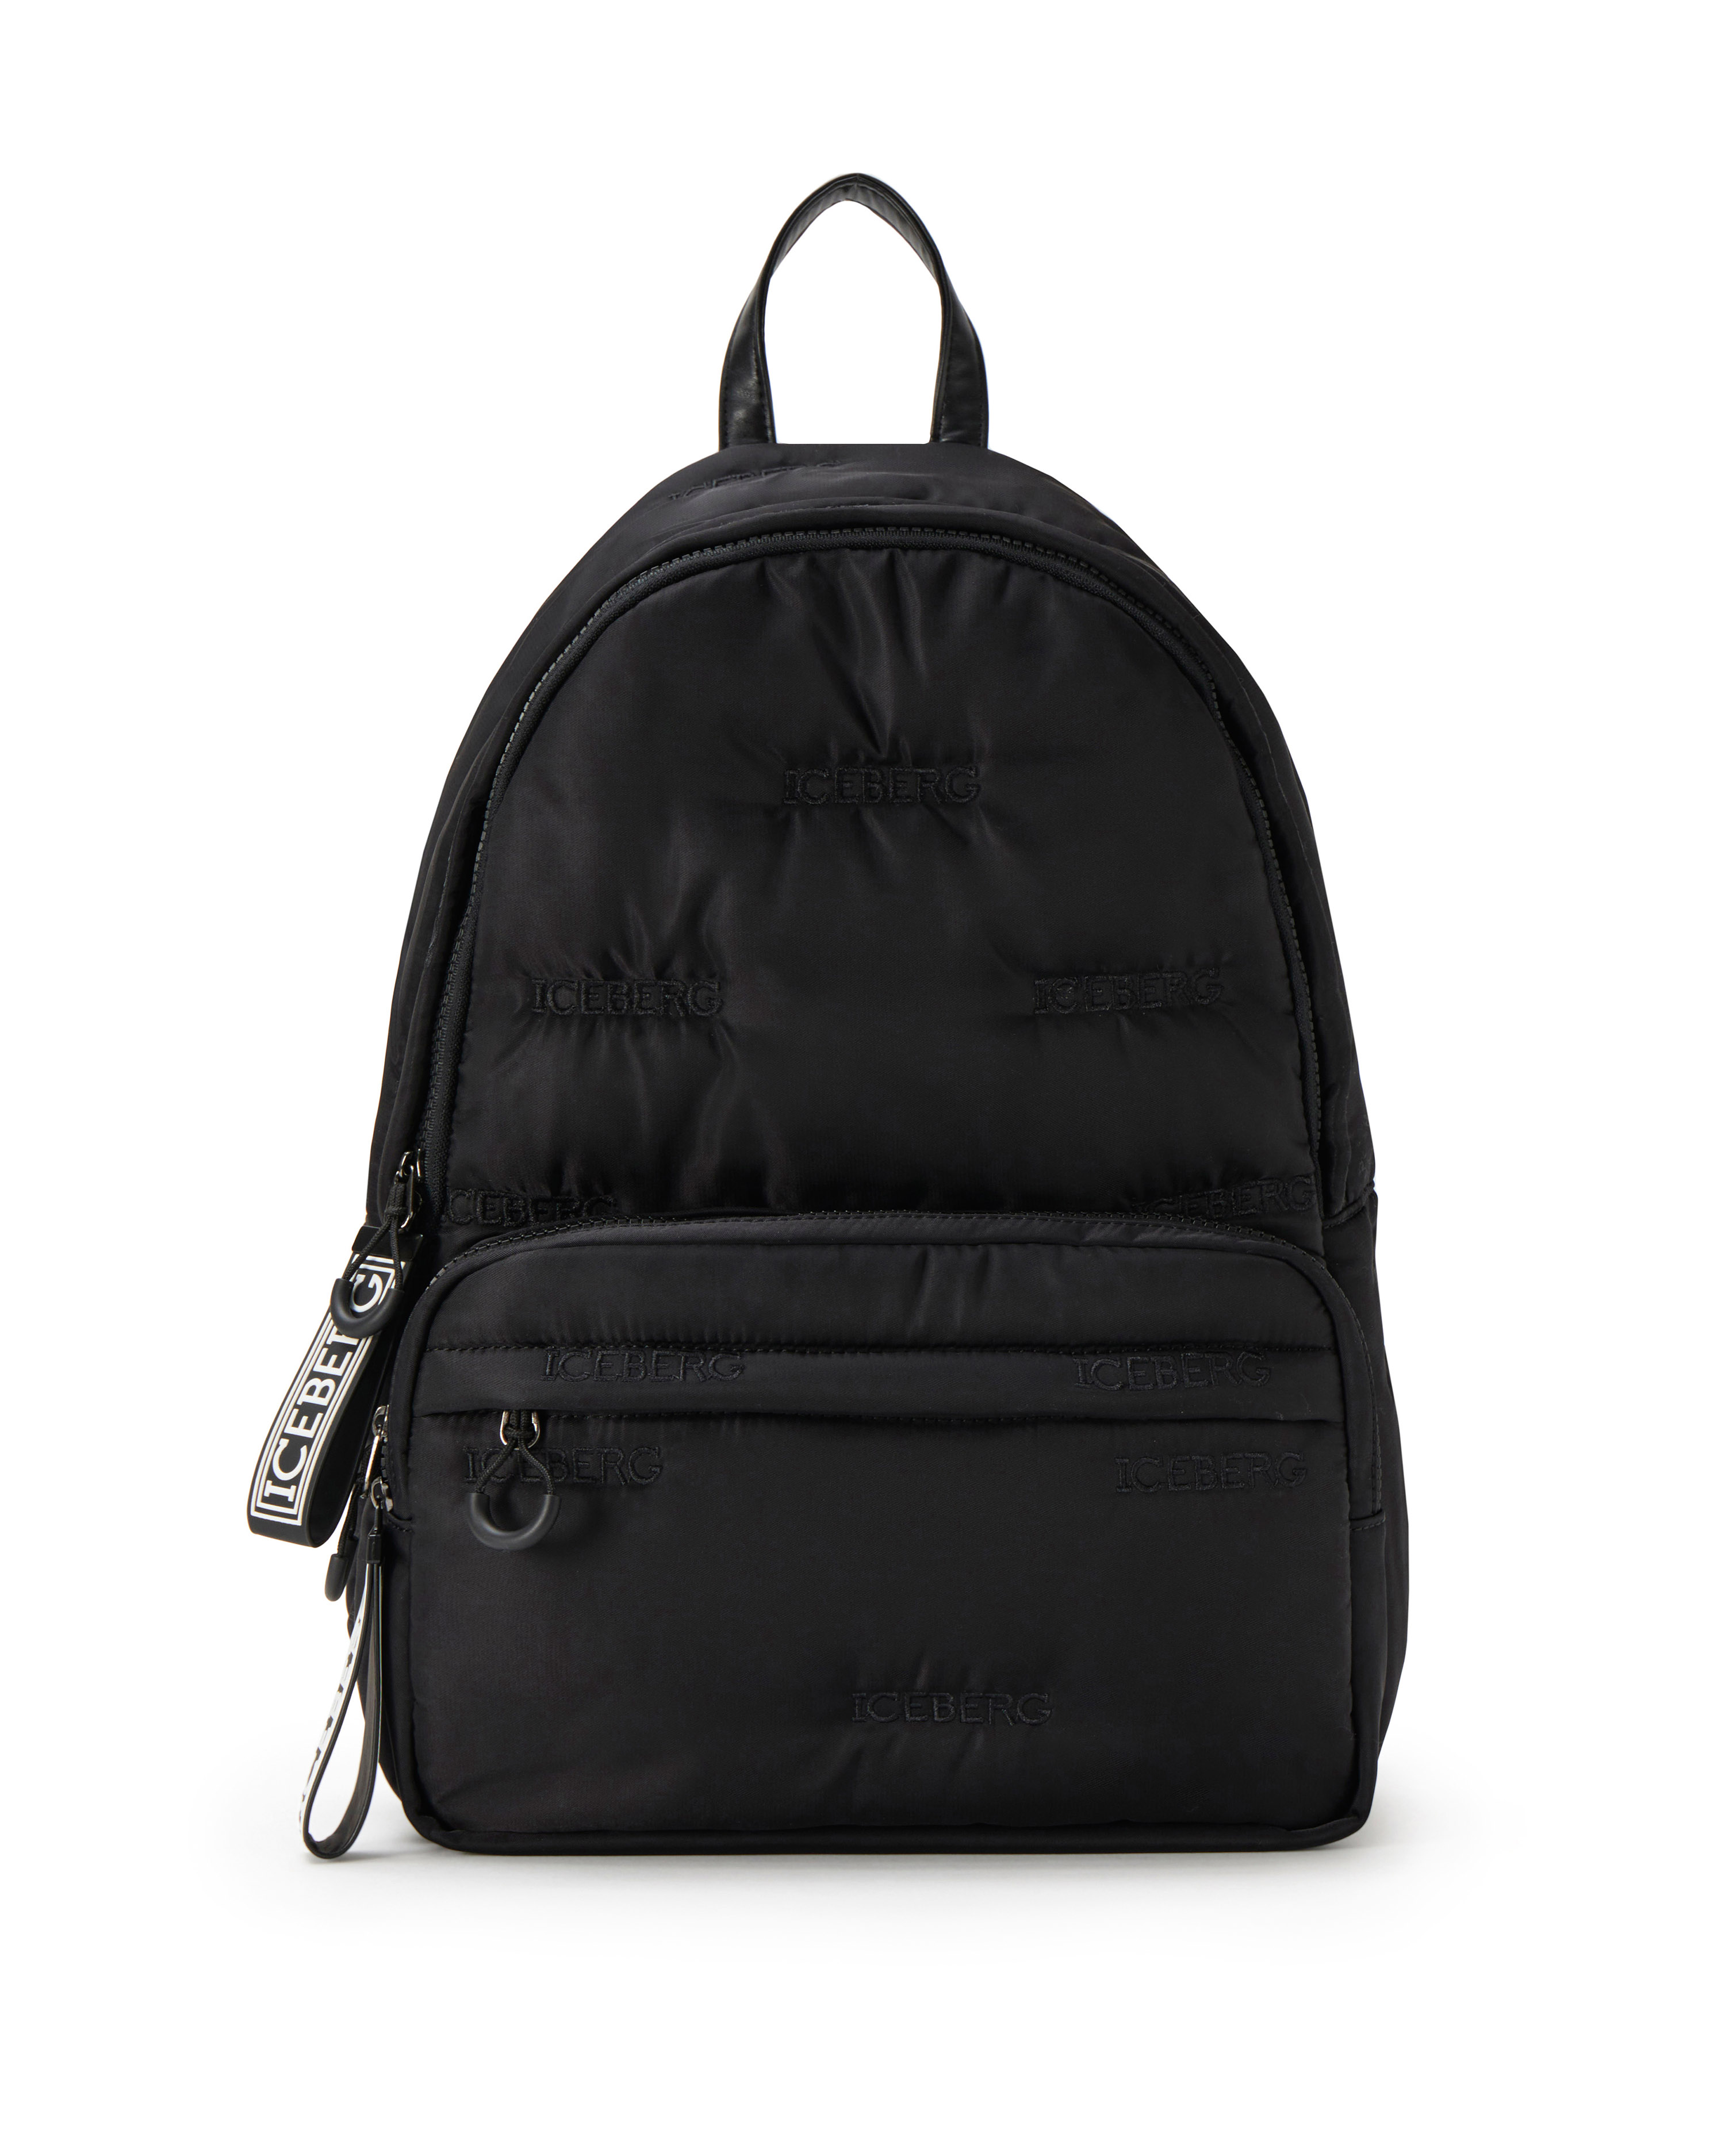 Backpack with all over logo - Accessories | Iceberg - Official Website